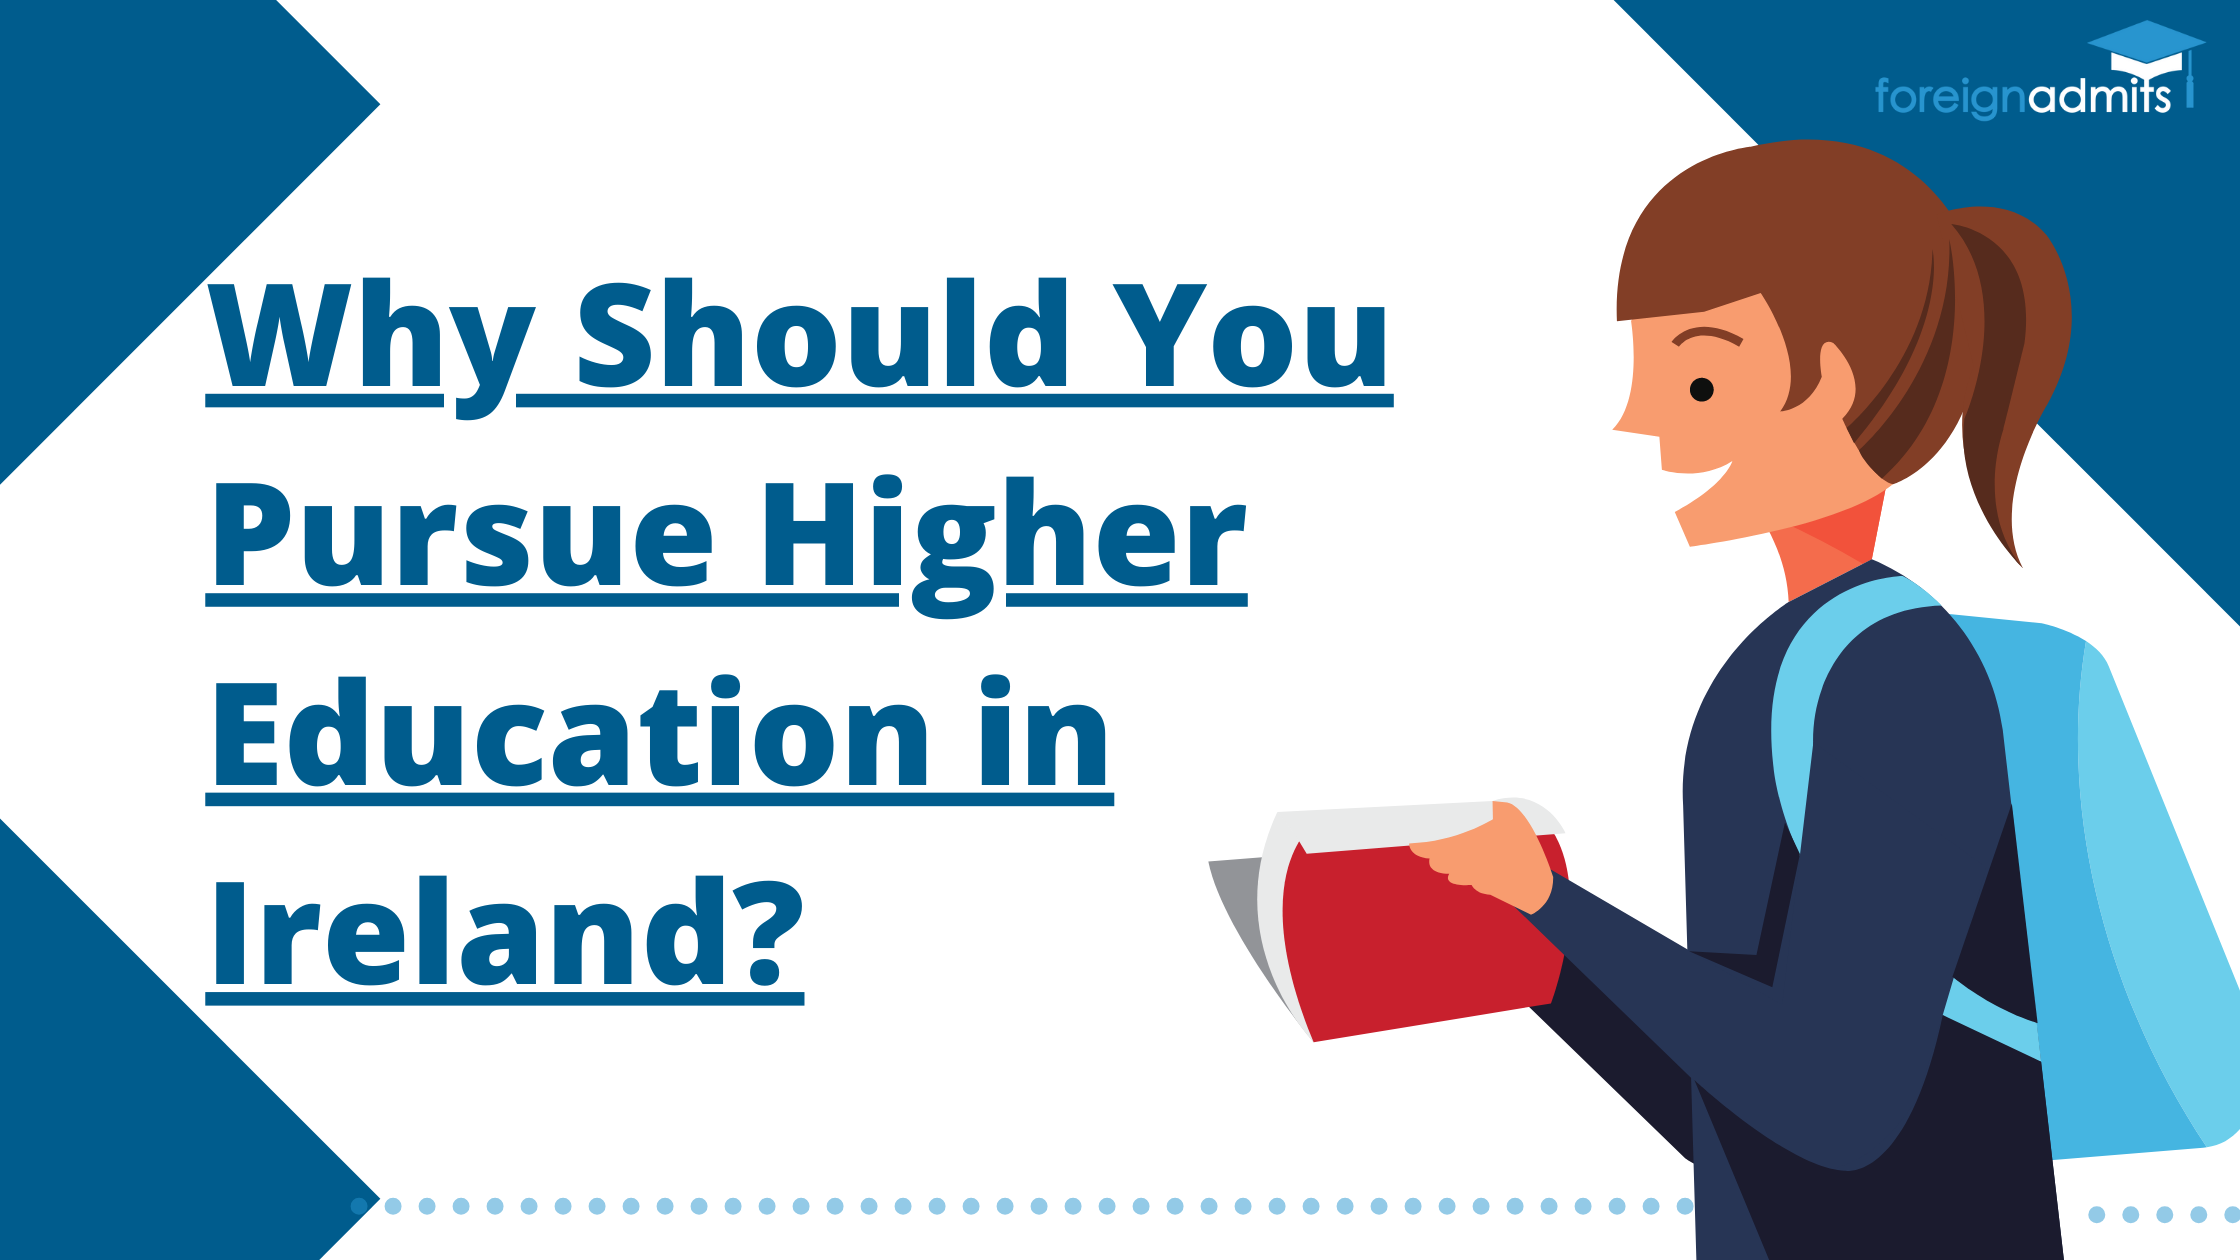 Why Should You Pursue Higher Education in Ireland?